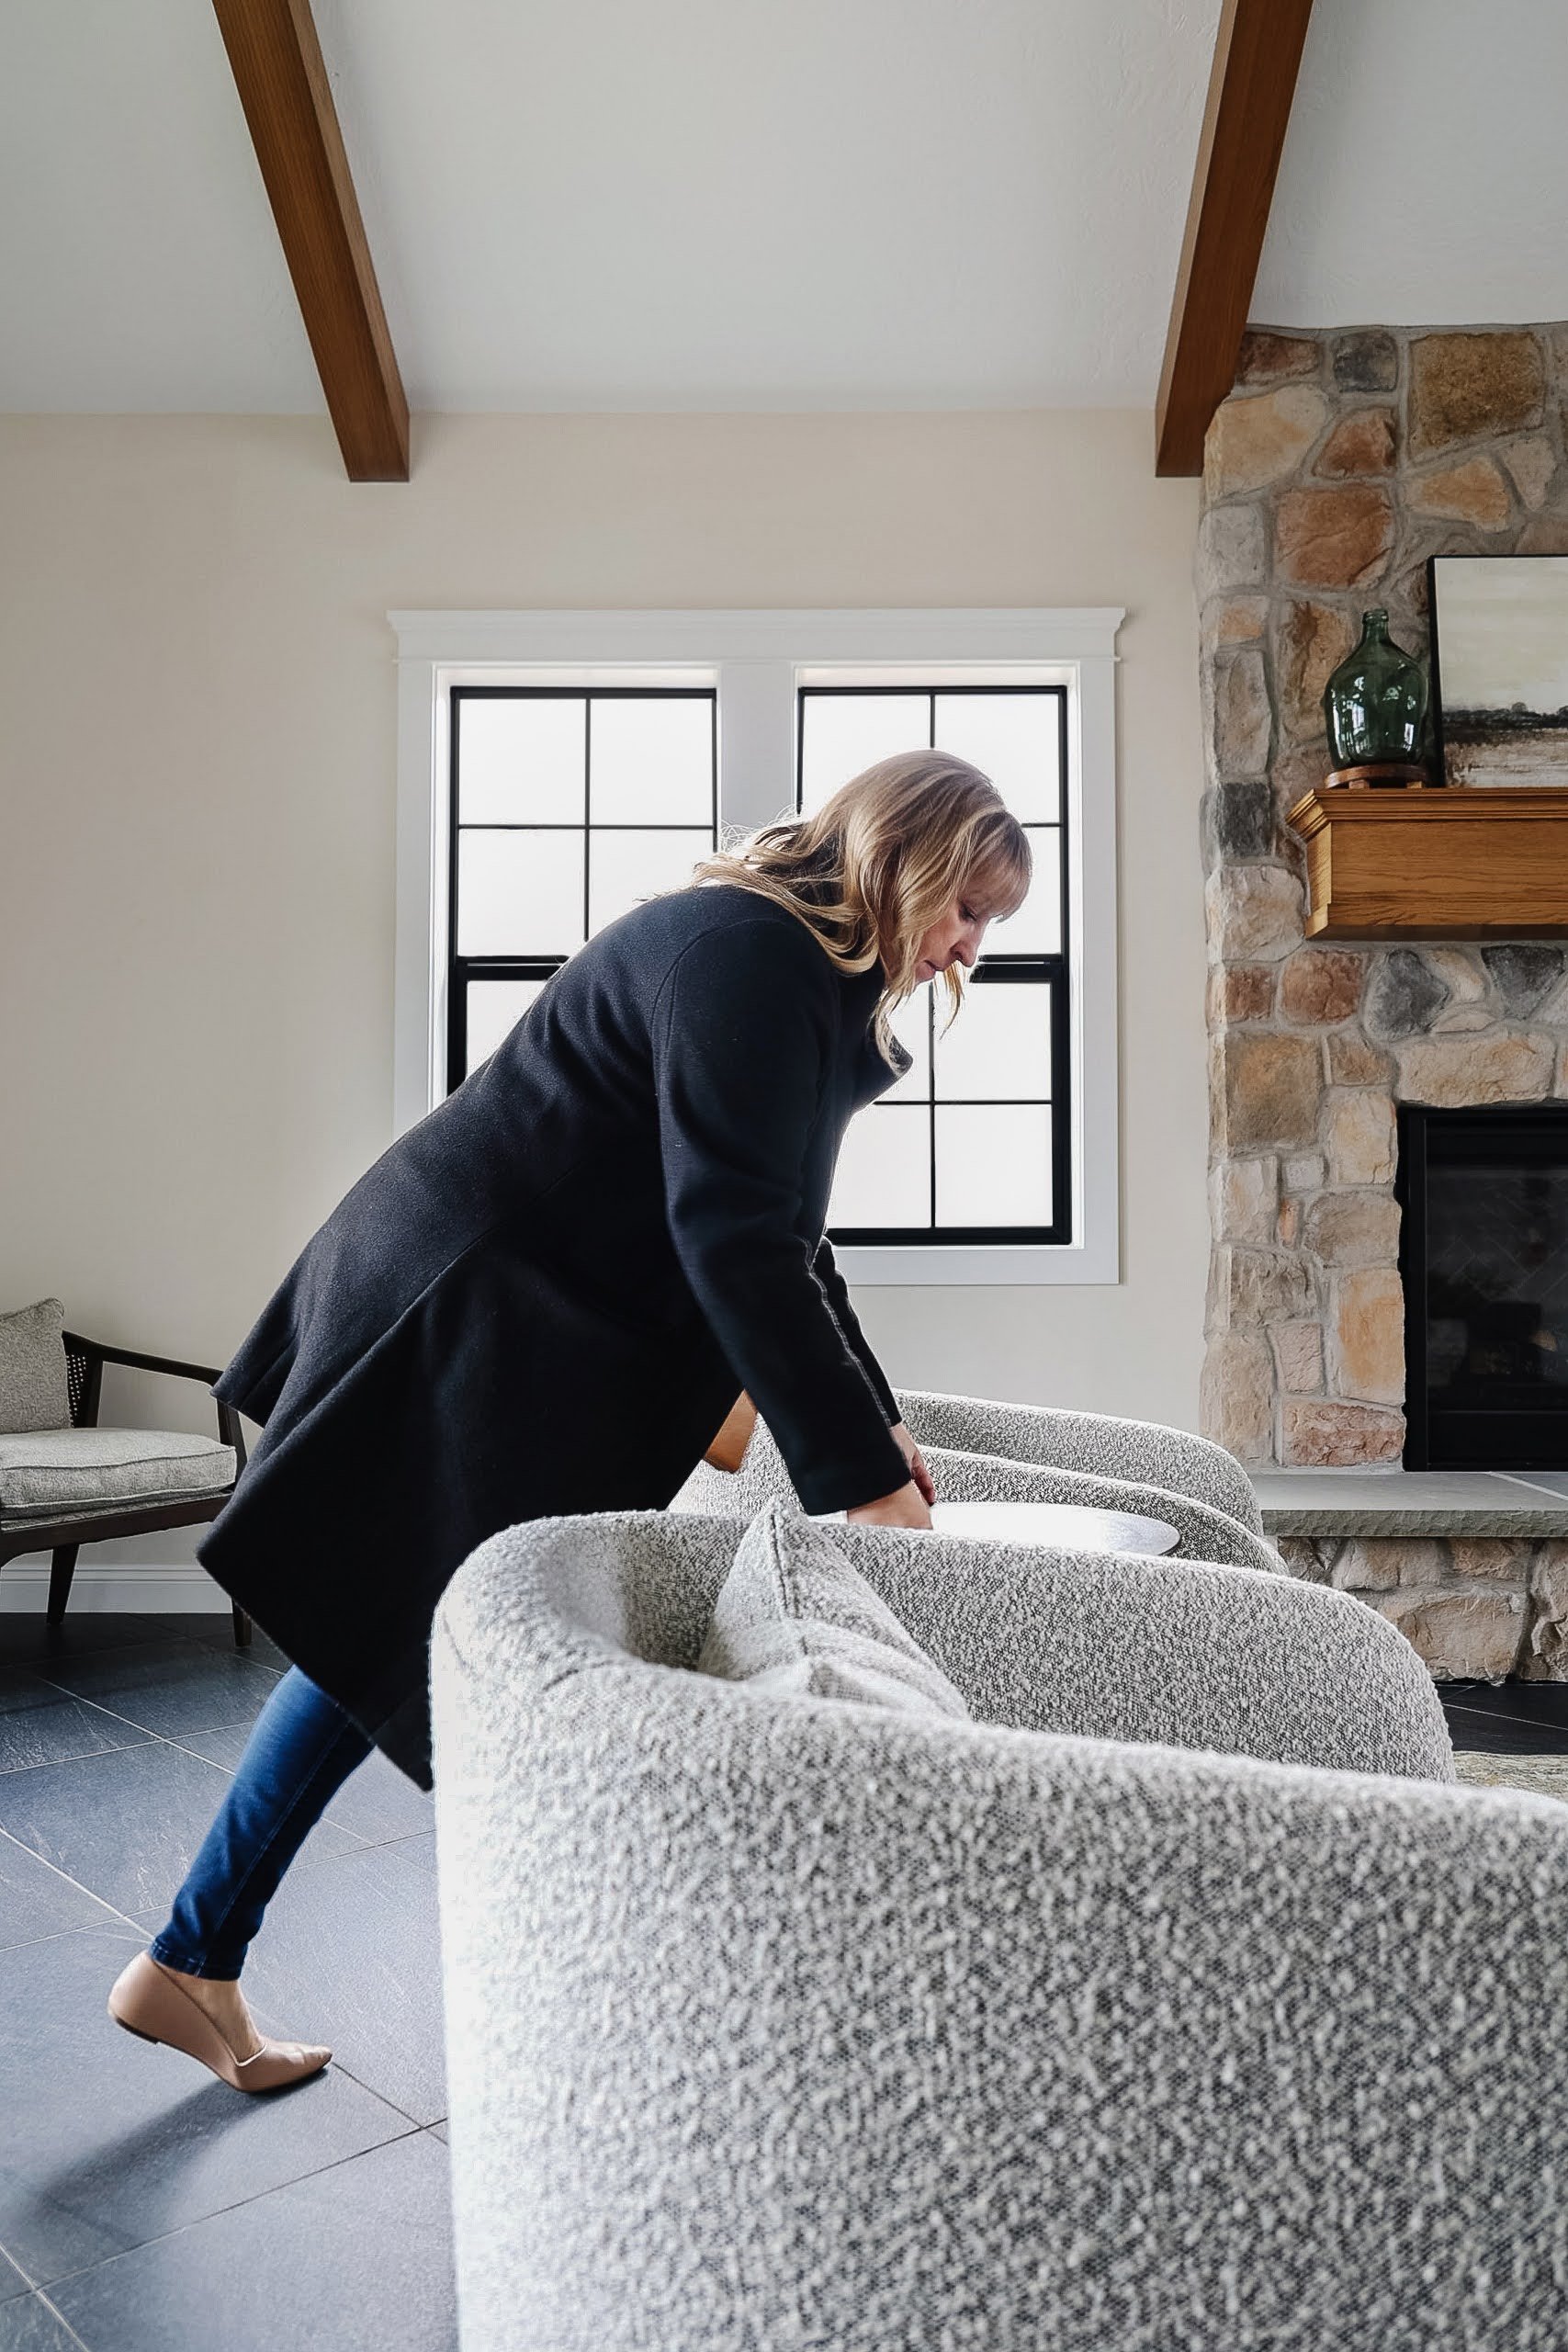  Liz Powell Design tries to avoid including trendy designs inside or outside the homes they work on. It’s important to them that they create homes where their clients will be comfortable and happy for decades to come. #LizPowellDesign #MistakesToAvoi